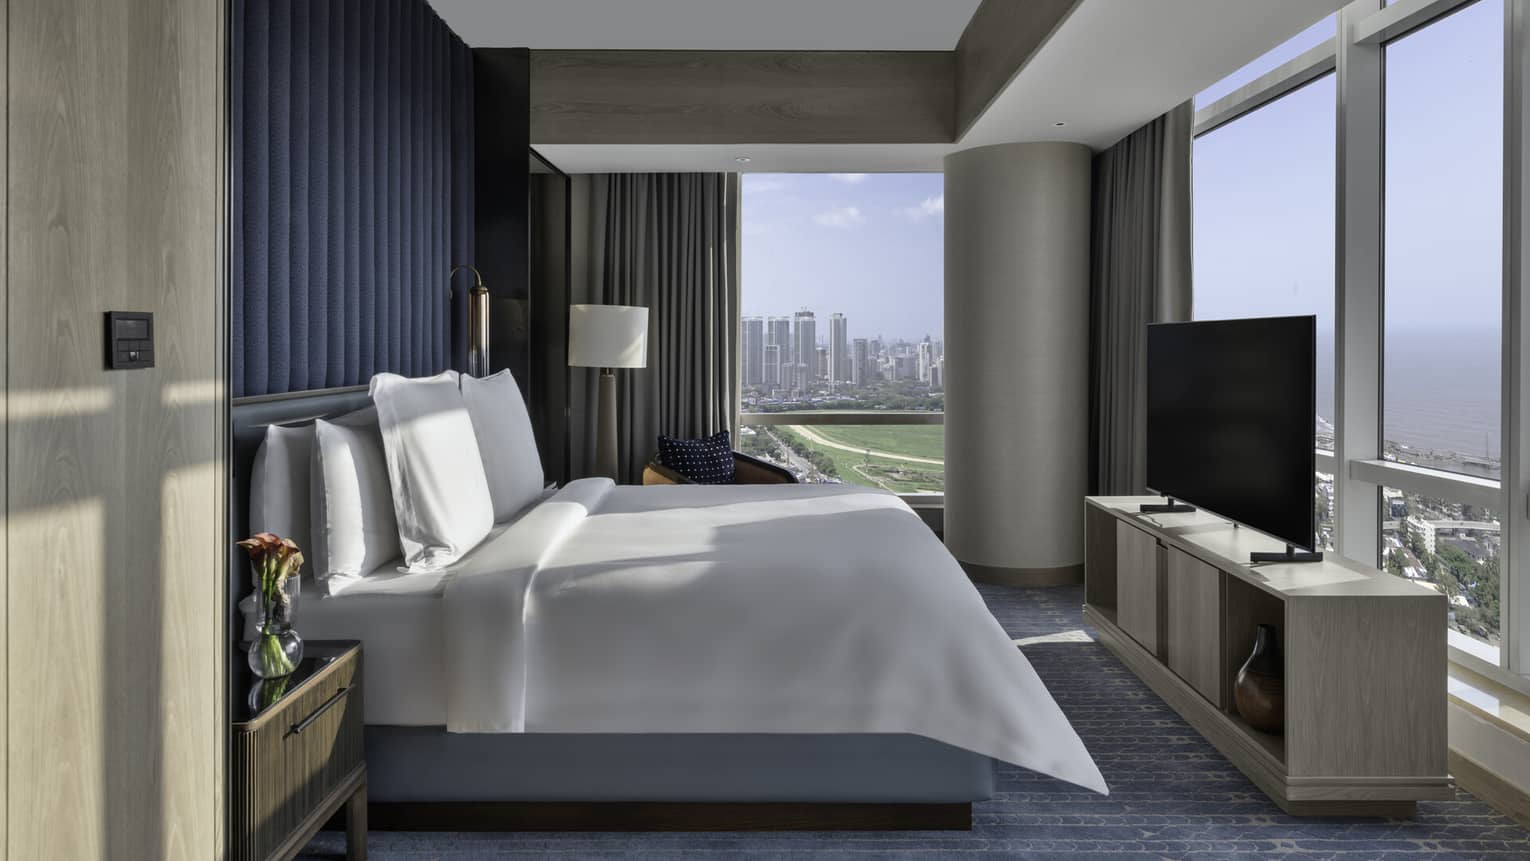 Renovated Deluxe Sea-View Room with bed and white linens, flat screen TV on stand, teal carpet and accent wall, floor-to-ceiling windows with city views